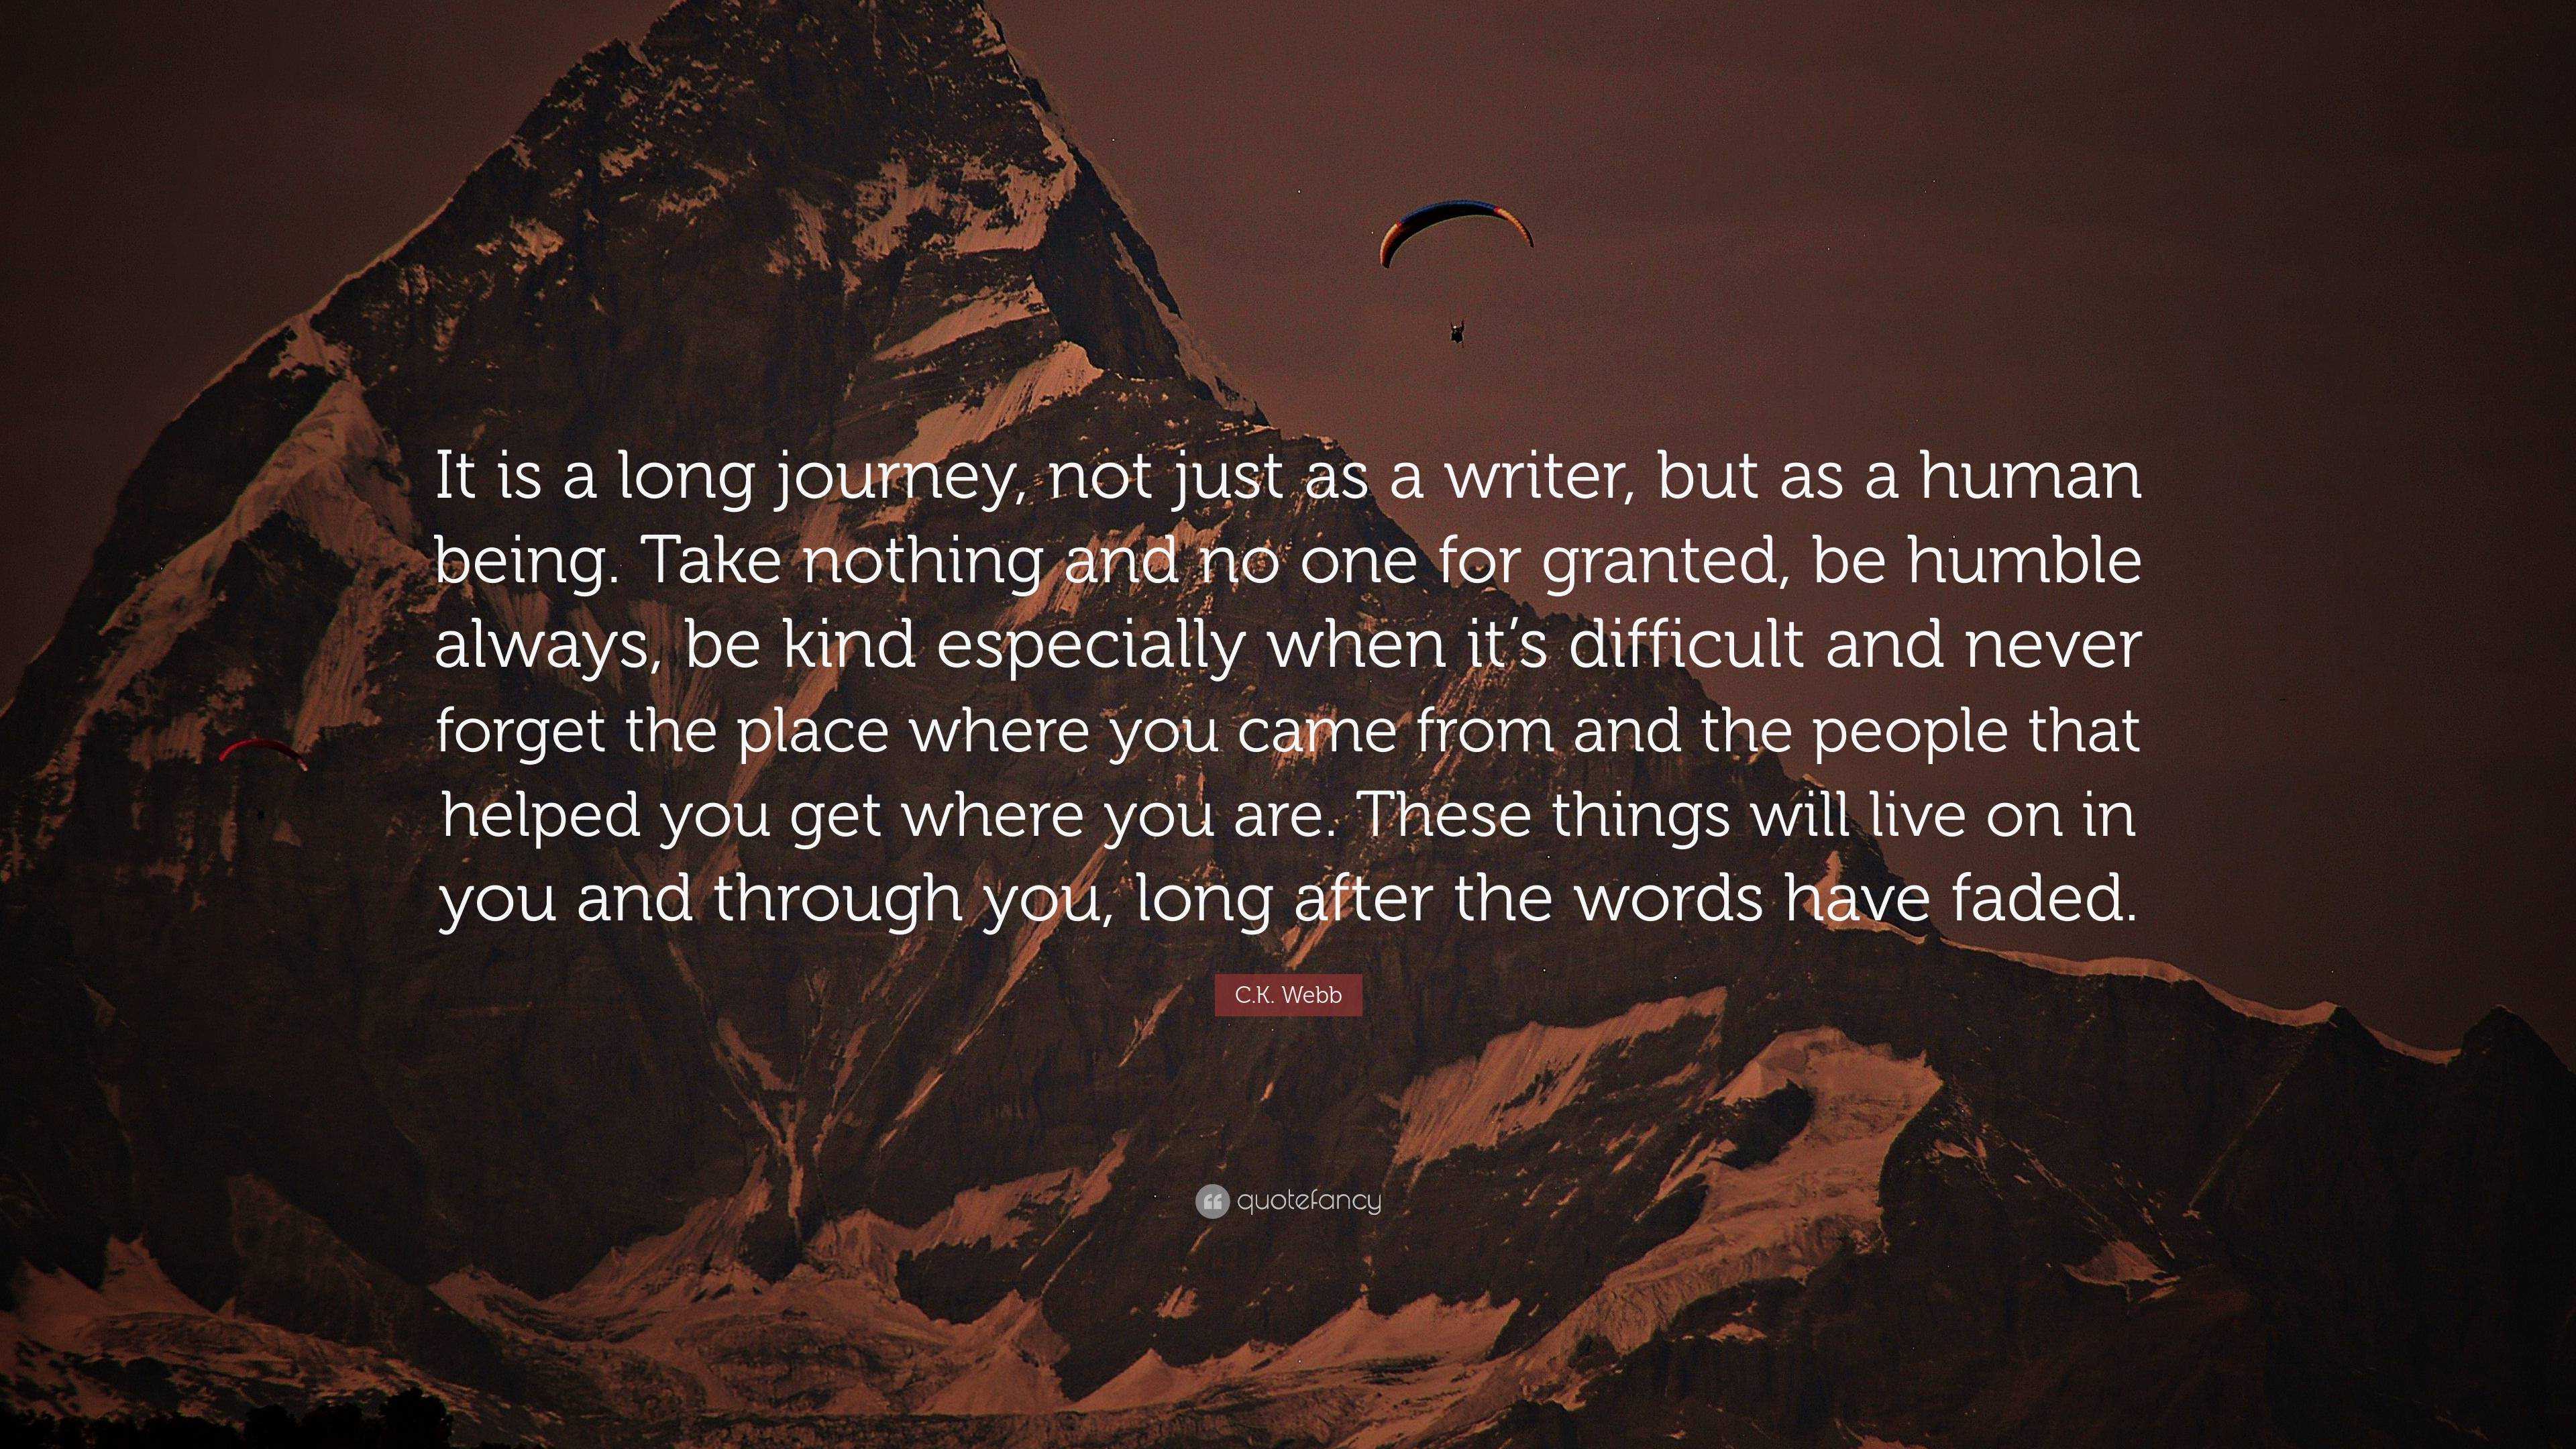 . Webb Quote: “It is a long journey, not just as a writer, but as a  human being. Take nothing and no one for granted, be humble always,...”